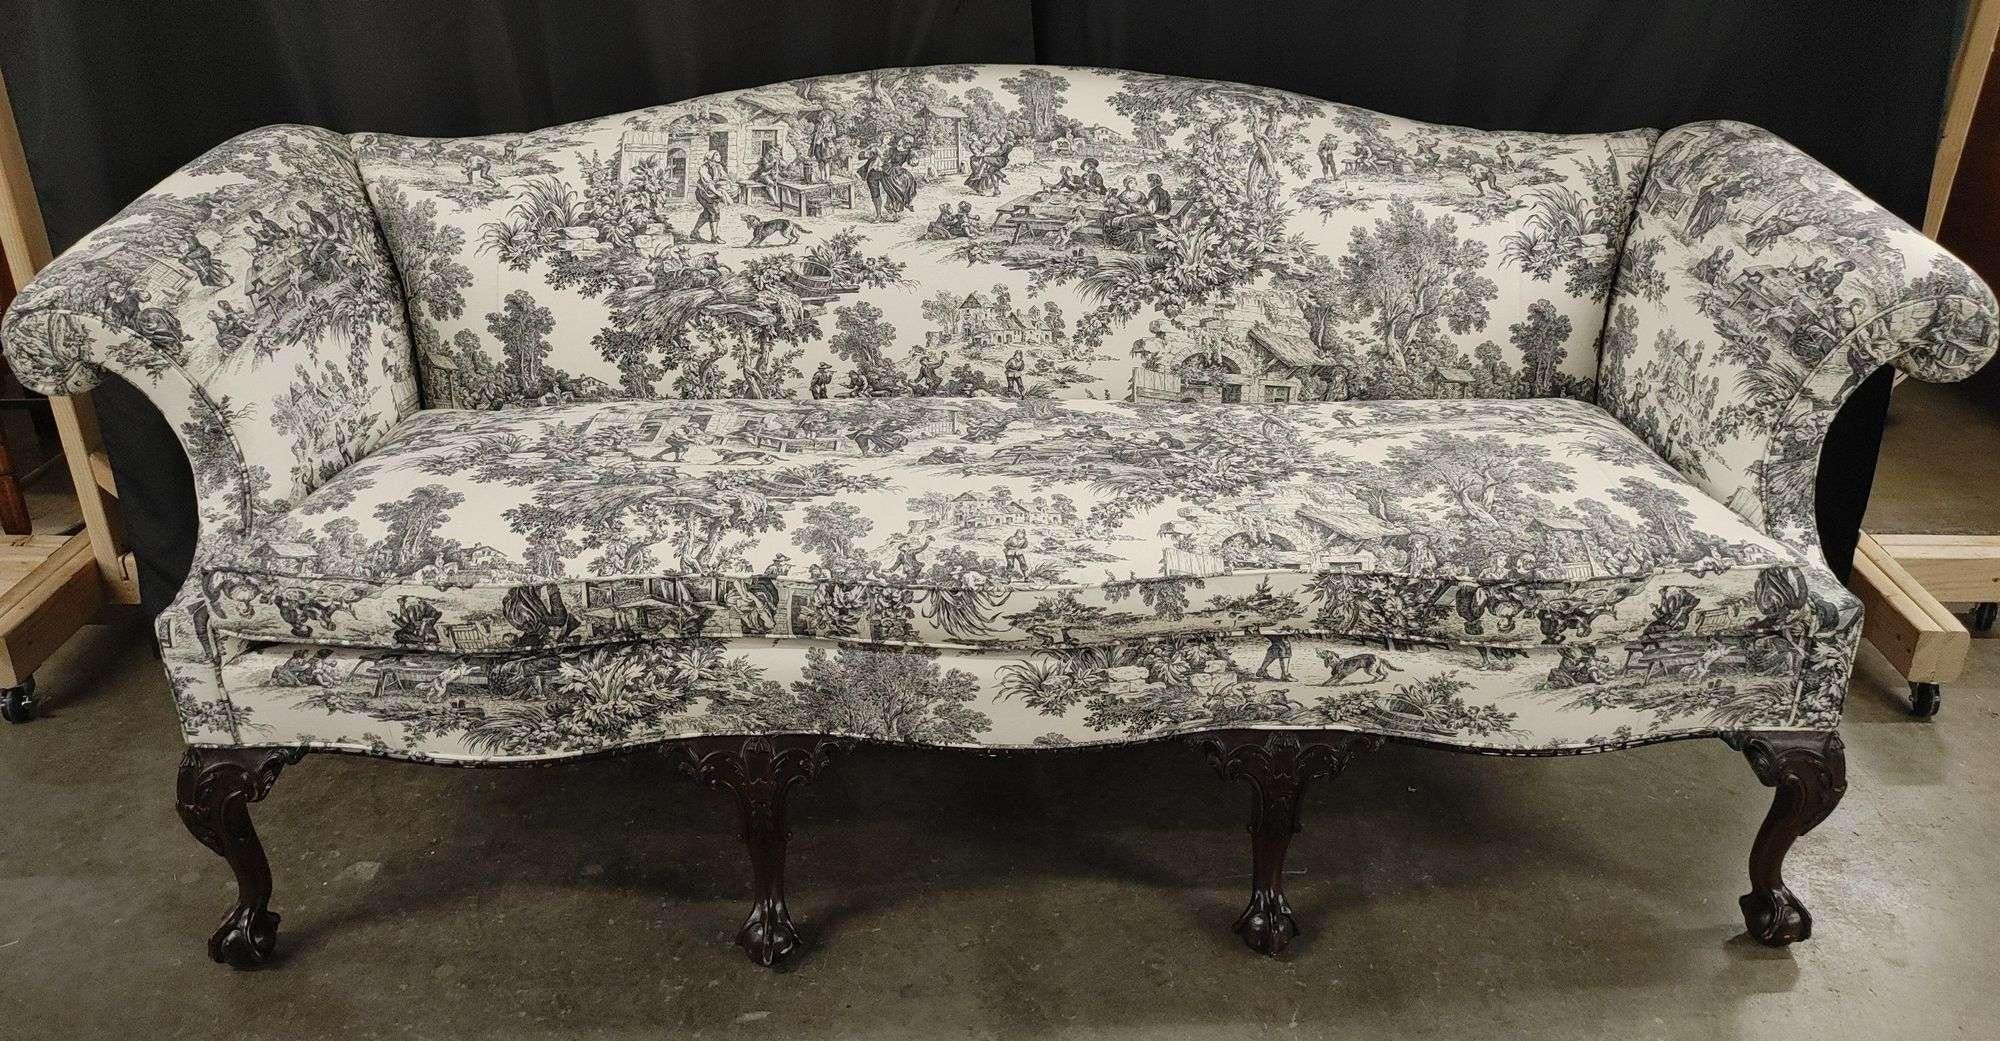 Stickley Furniture, Chippendale / Rococo Style upholstered camelback sofa by Stickley Furniture; Part of the Williamsburg Reserve Collection.
Sofa is upholstered in a beautiful toile fabric. Mahogany wood cabriole legs with ball and claw feet.